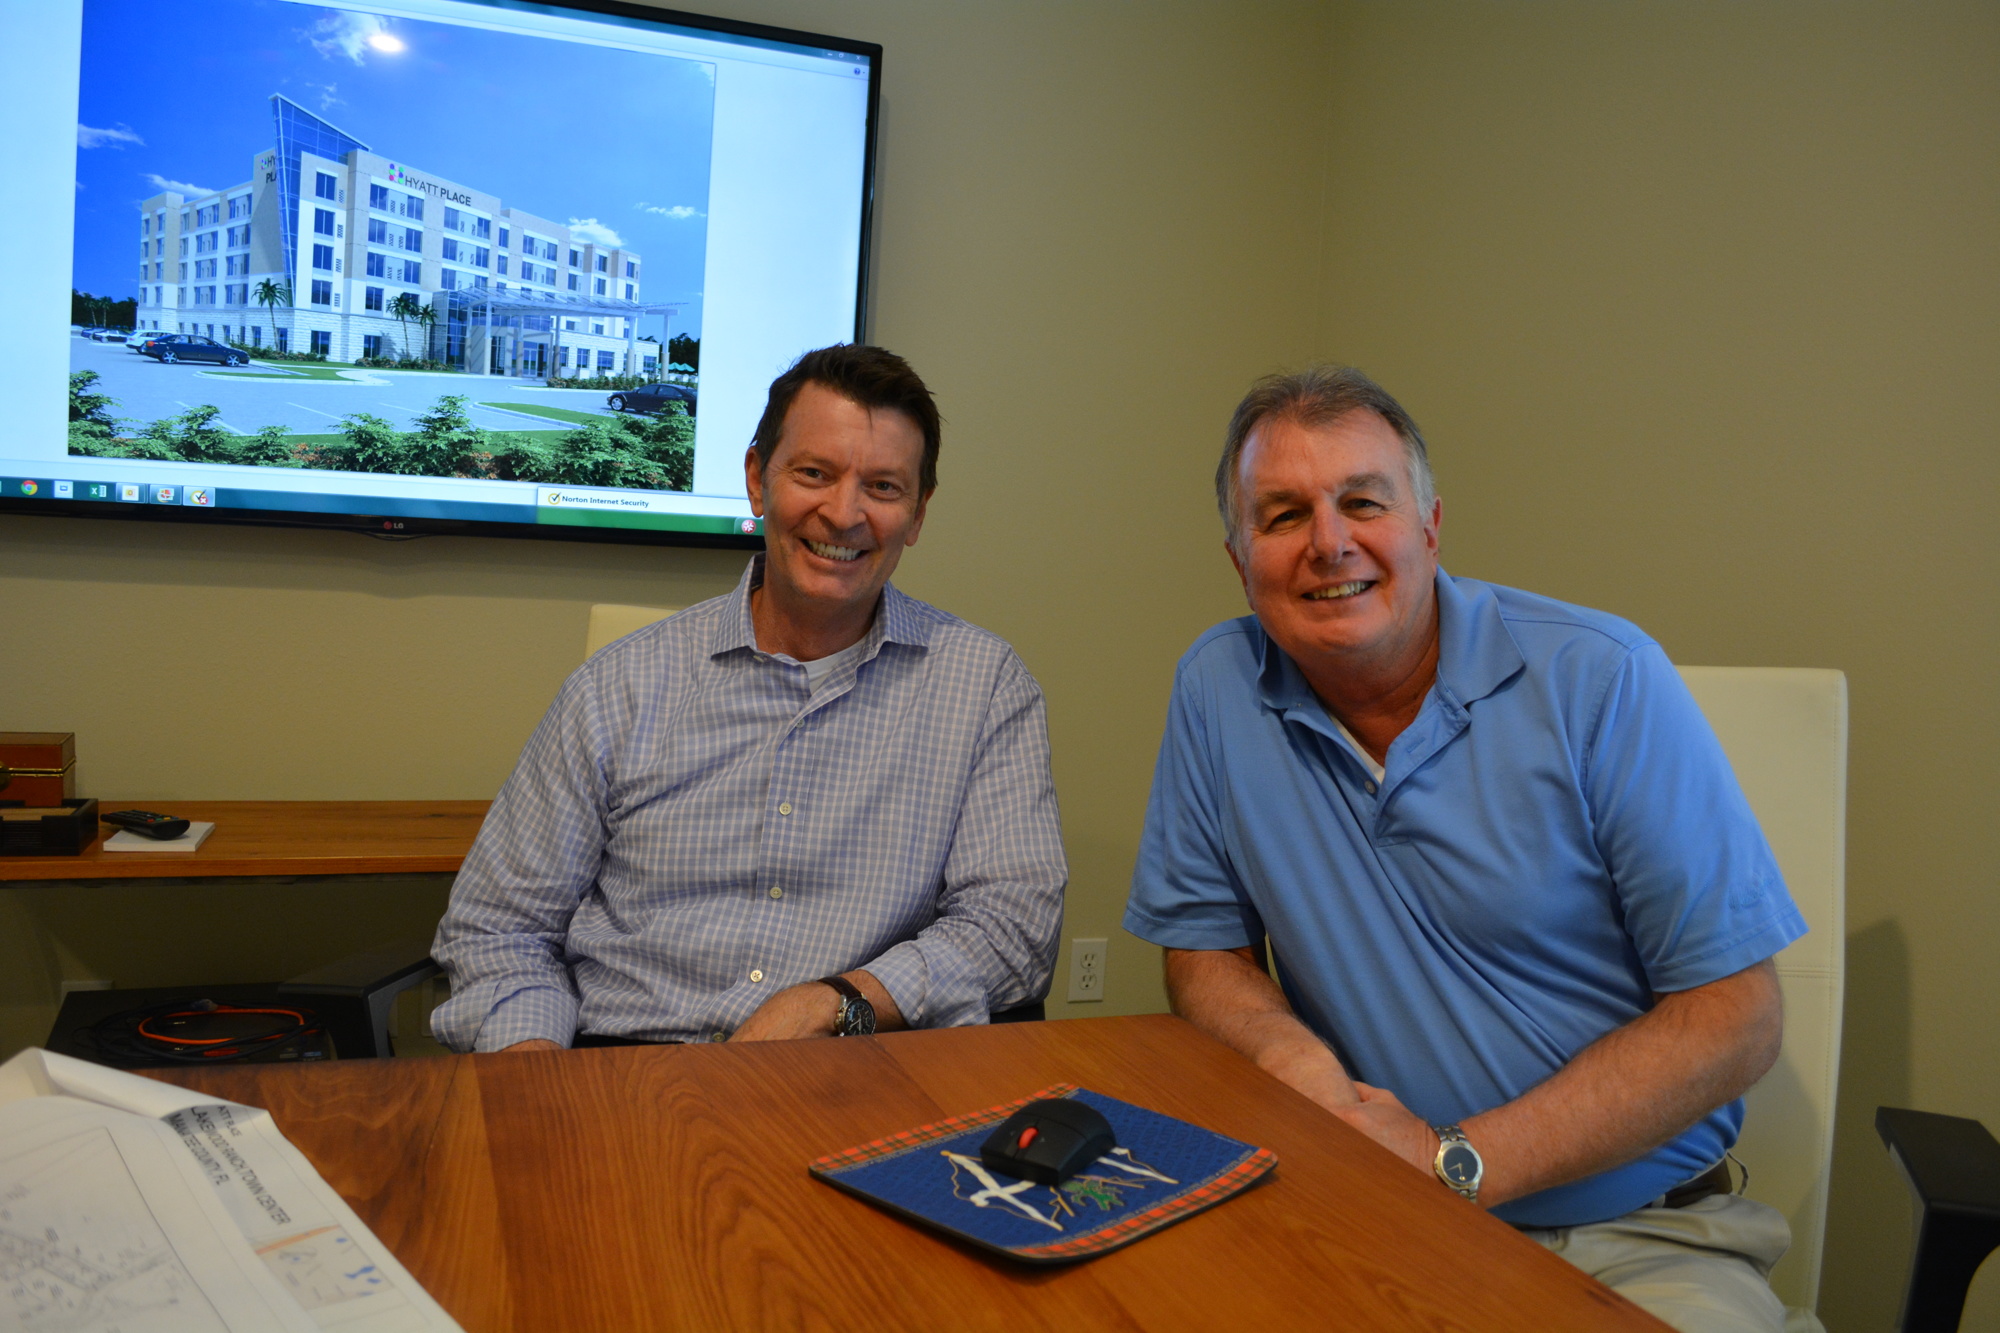 Floridays Development Co. CEO and President Angus Rogers and developer Steve Mullen are eager to partner with the Hyatt brand for the project.